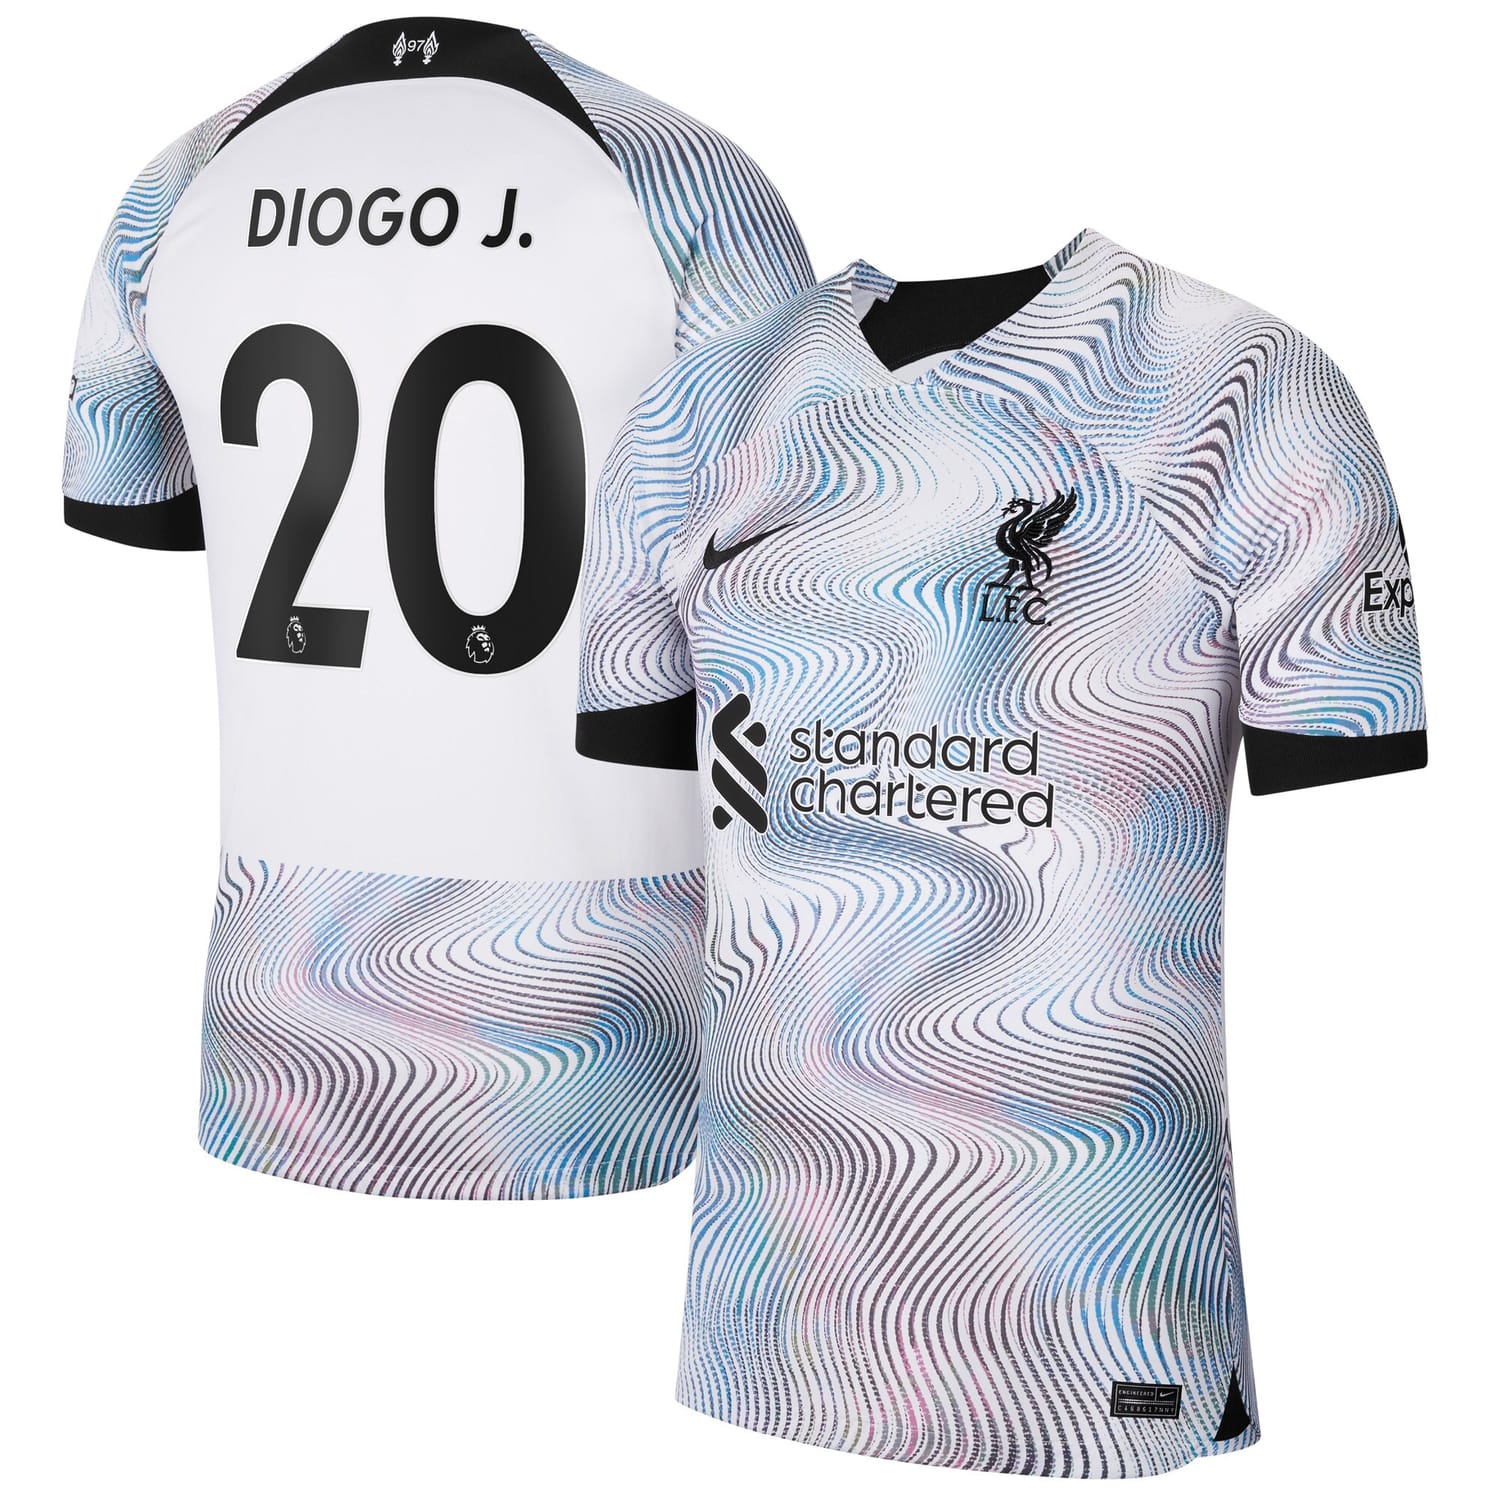 Premier League Liverpool Home Jersey Shirt White 2022-23 player Diogo Jota printing for Men